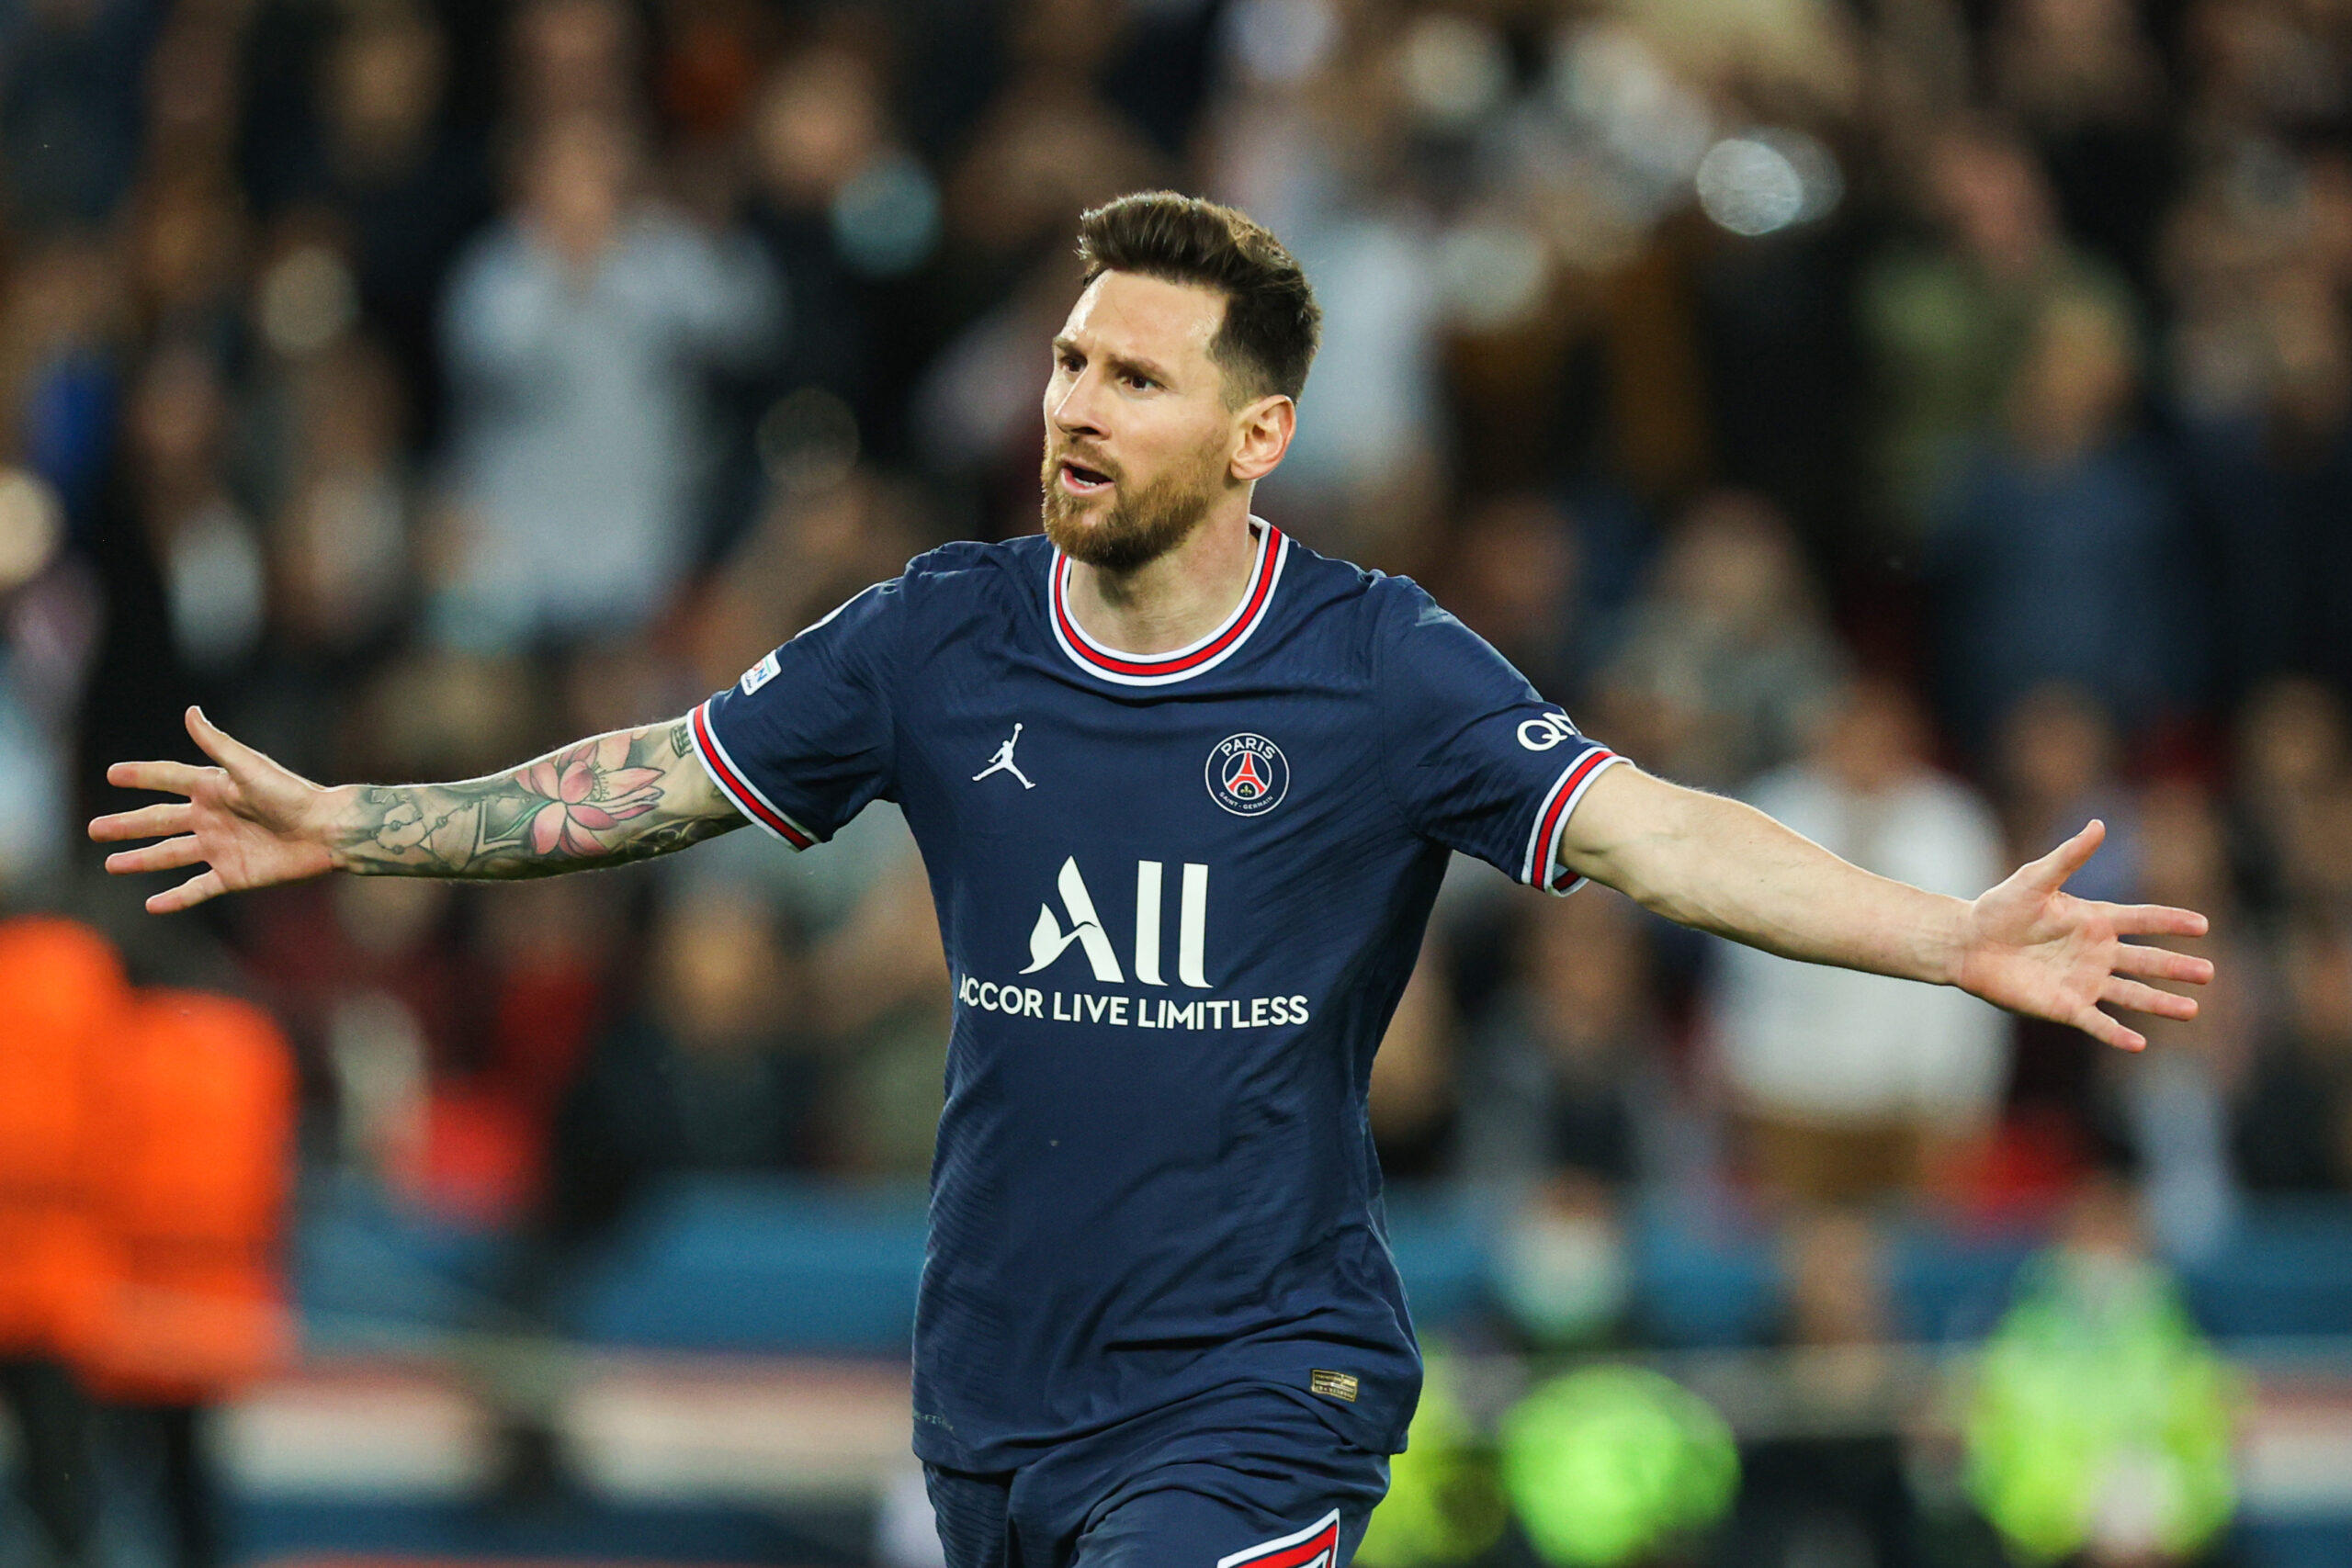 Lionel Messi And Kylian Mbappe Led PSG to Victory Against RB Leipzig | UEFA Champions League